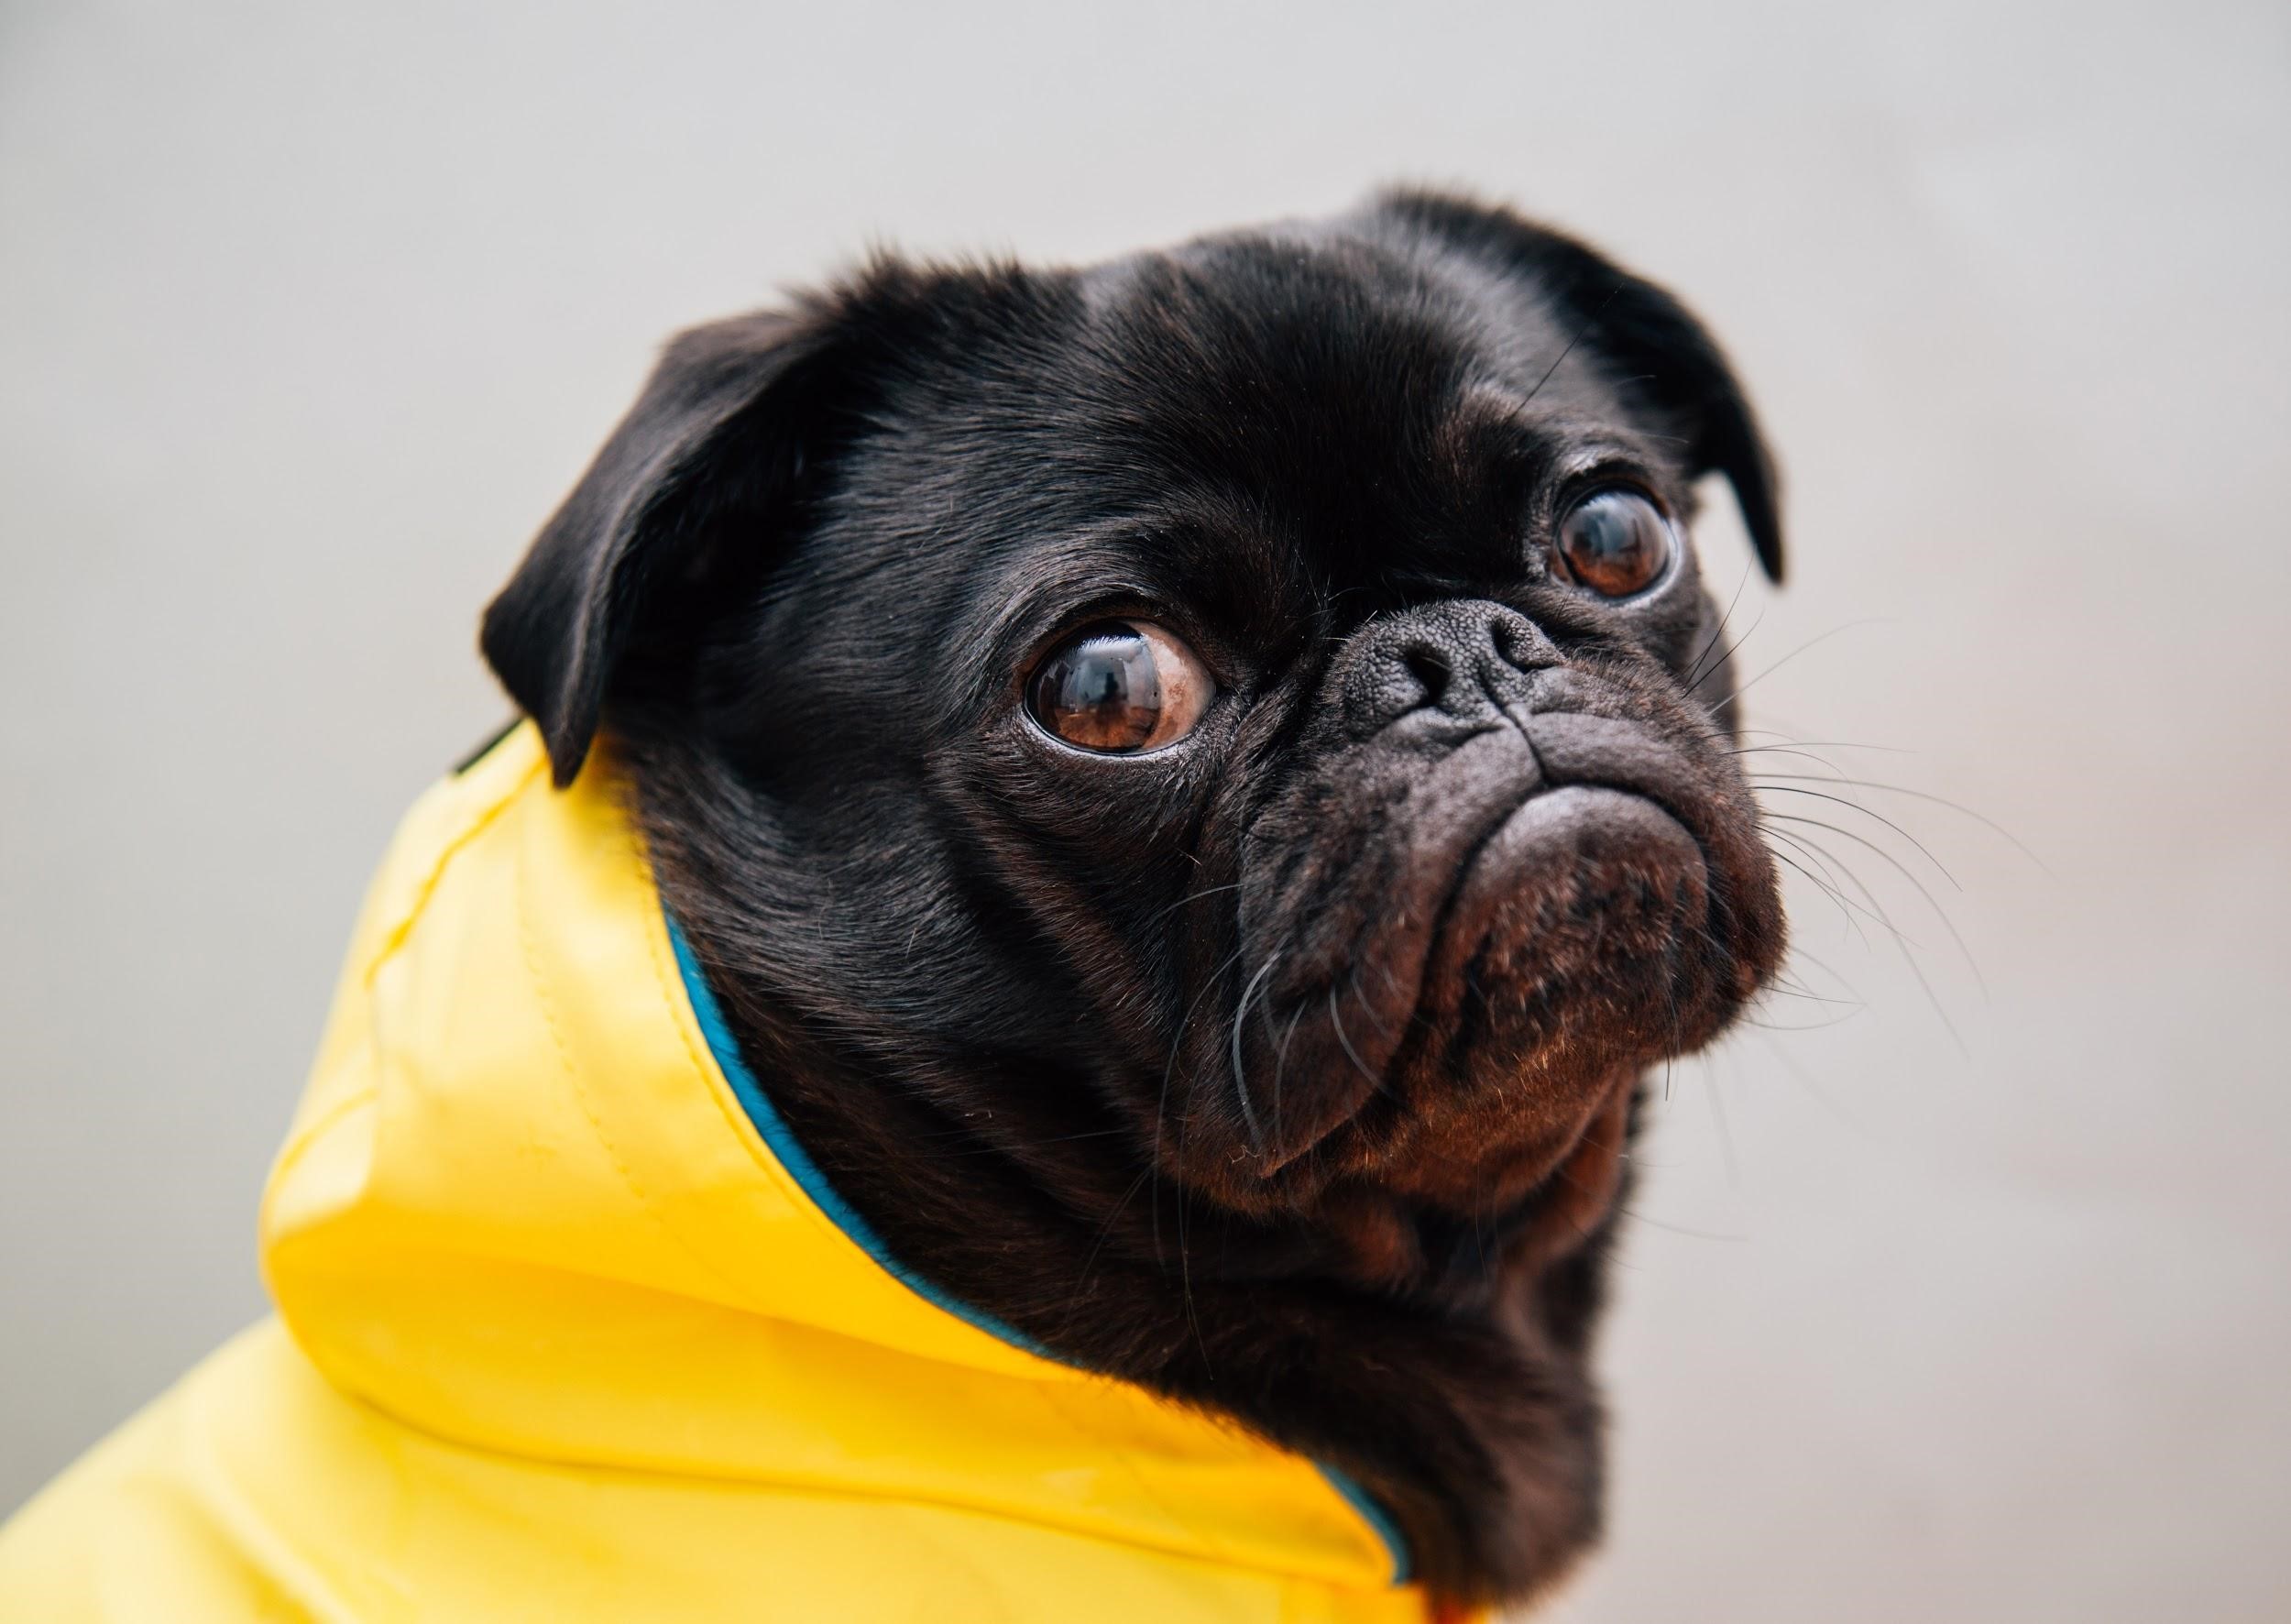 4 Precautions for Pet Owners Who Walk Their Dogs Rain or Shine